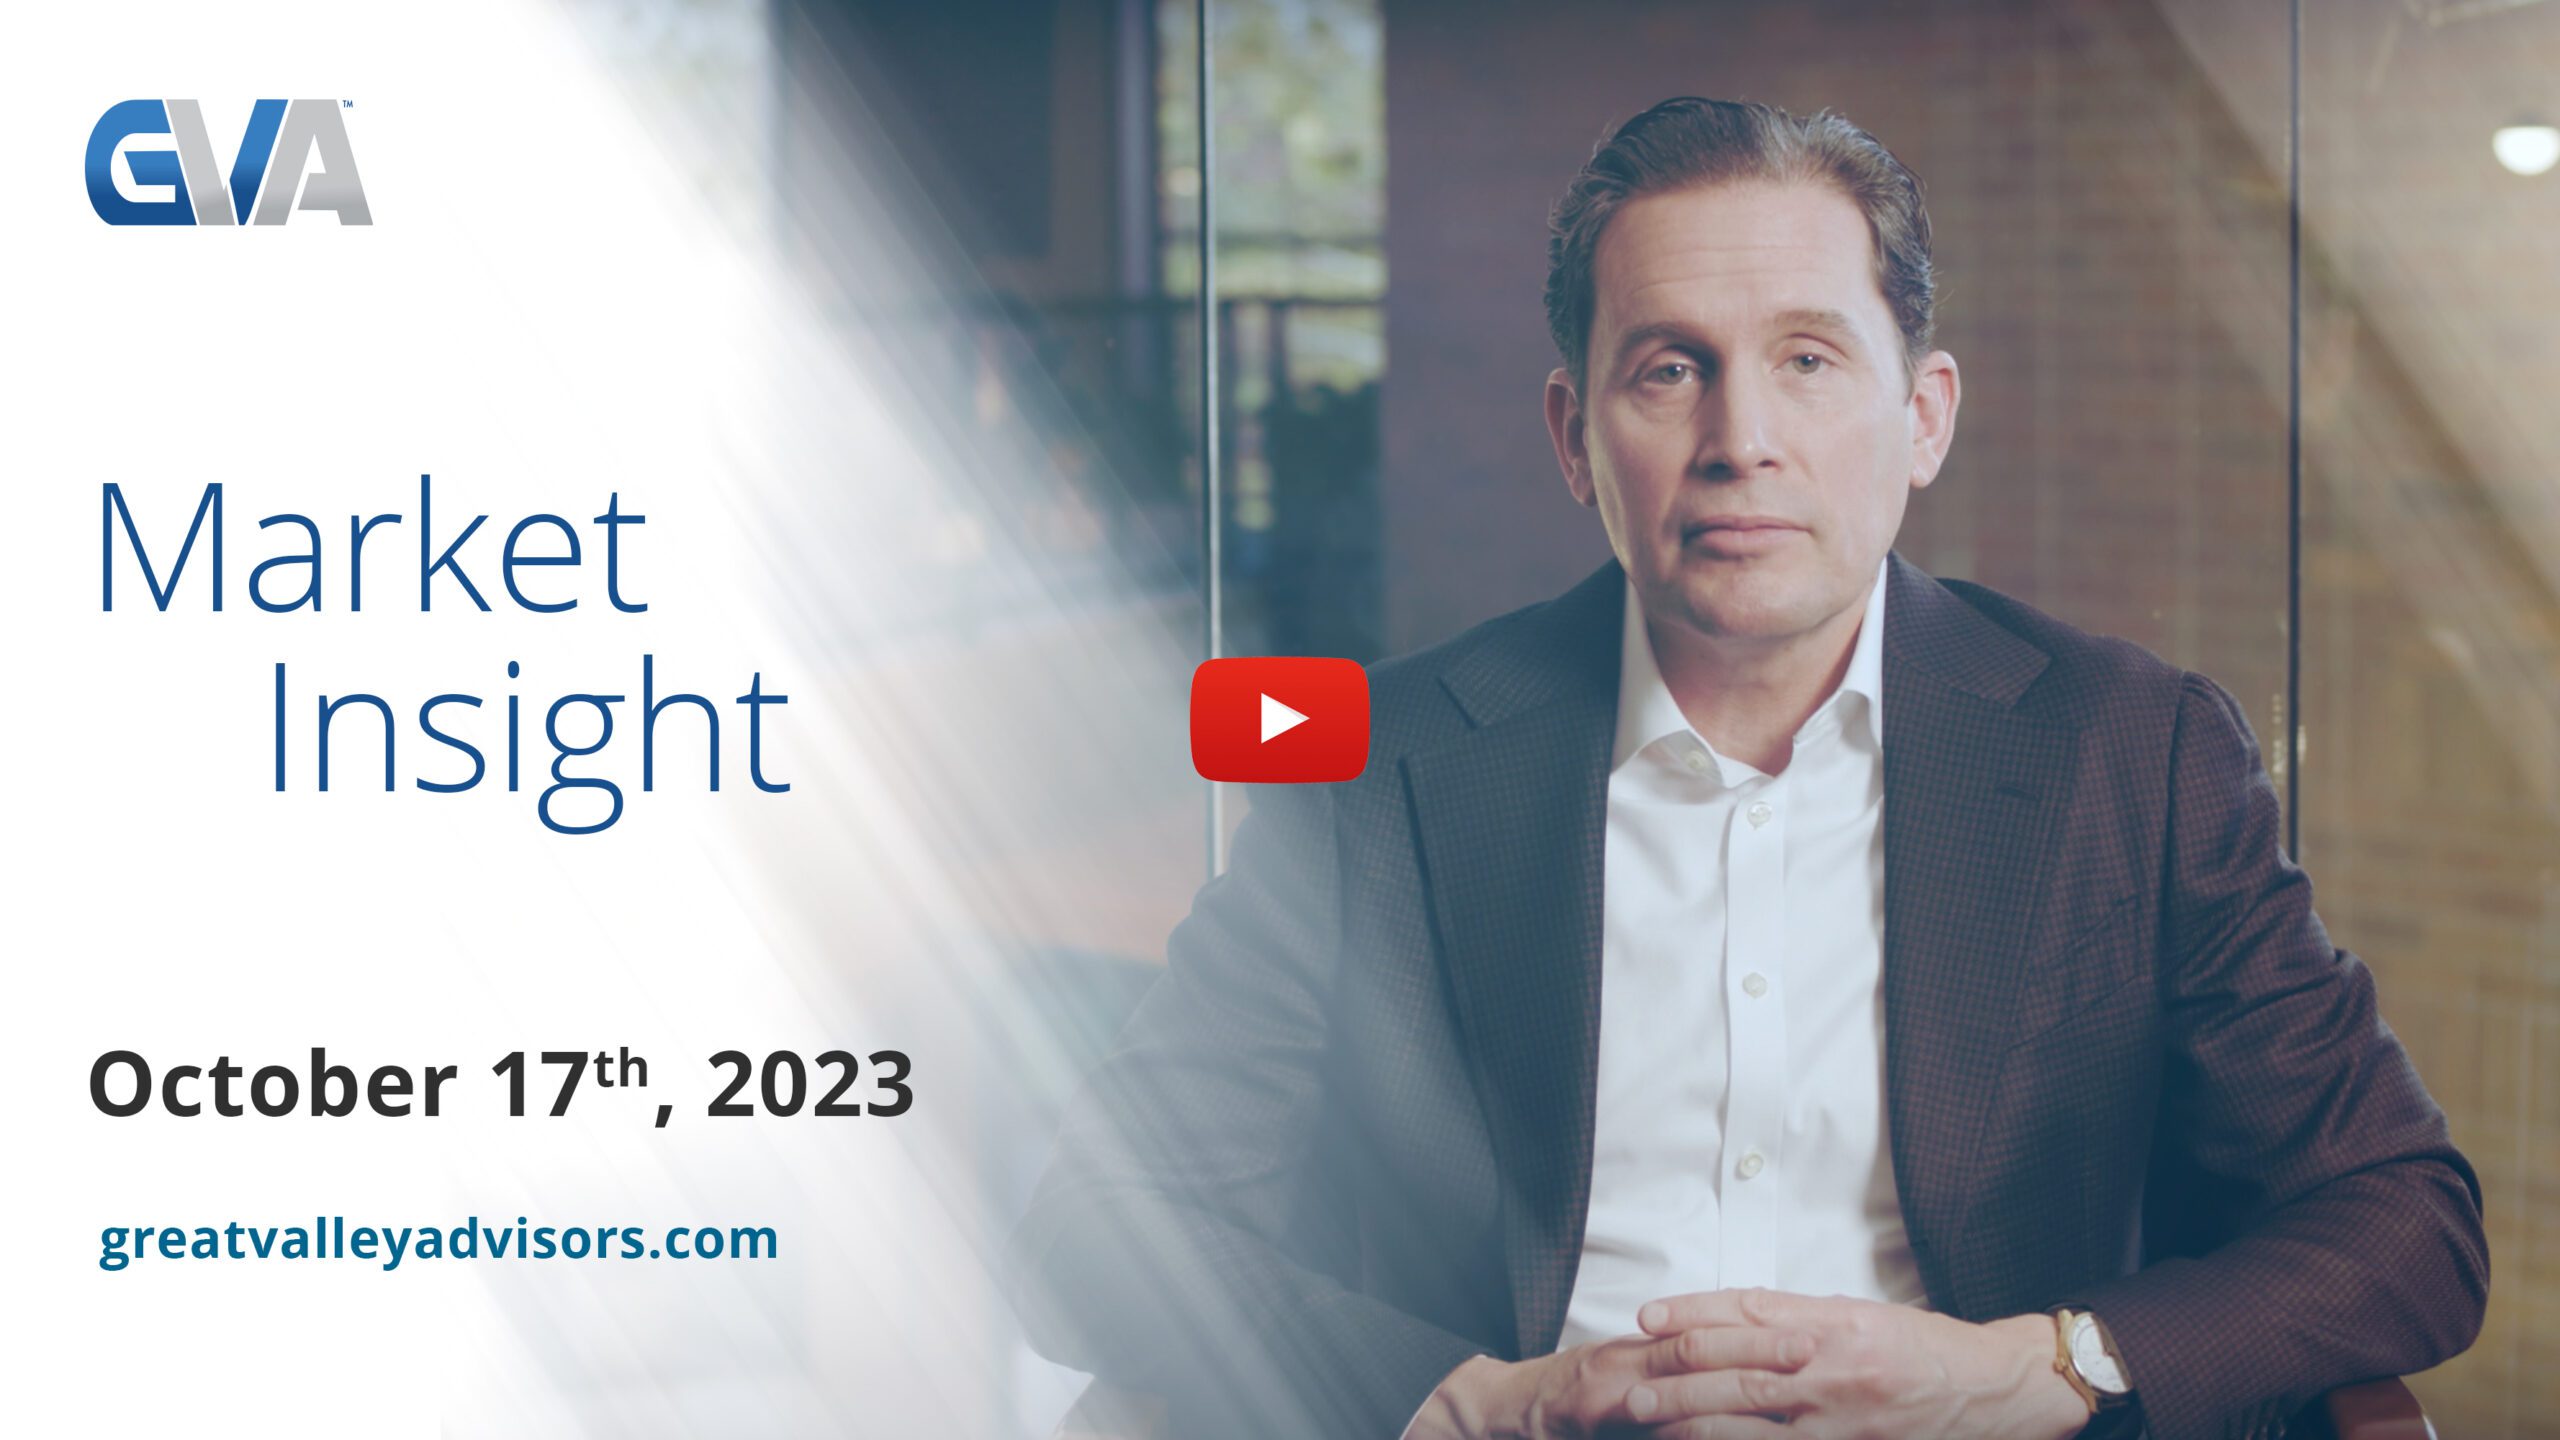 Market Insights with Eric: Episode 11, October 17th, 2023